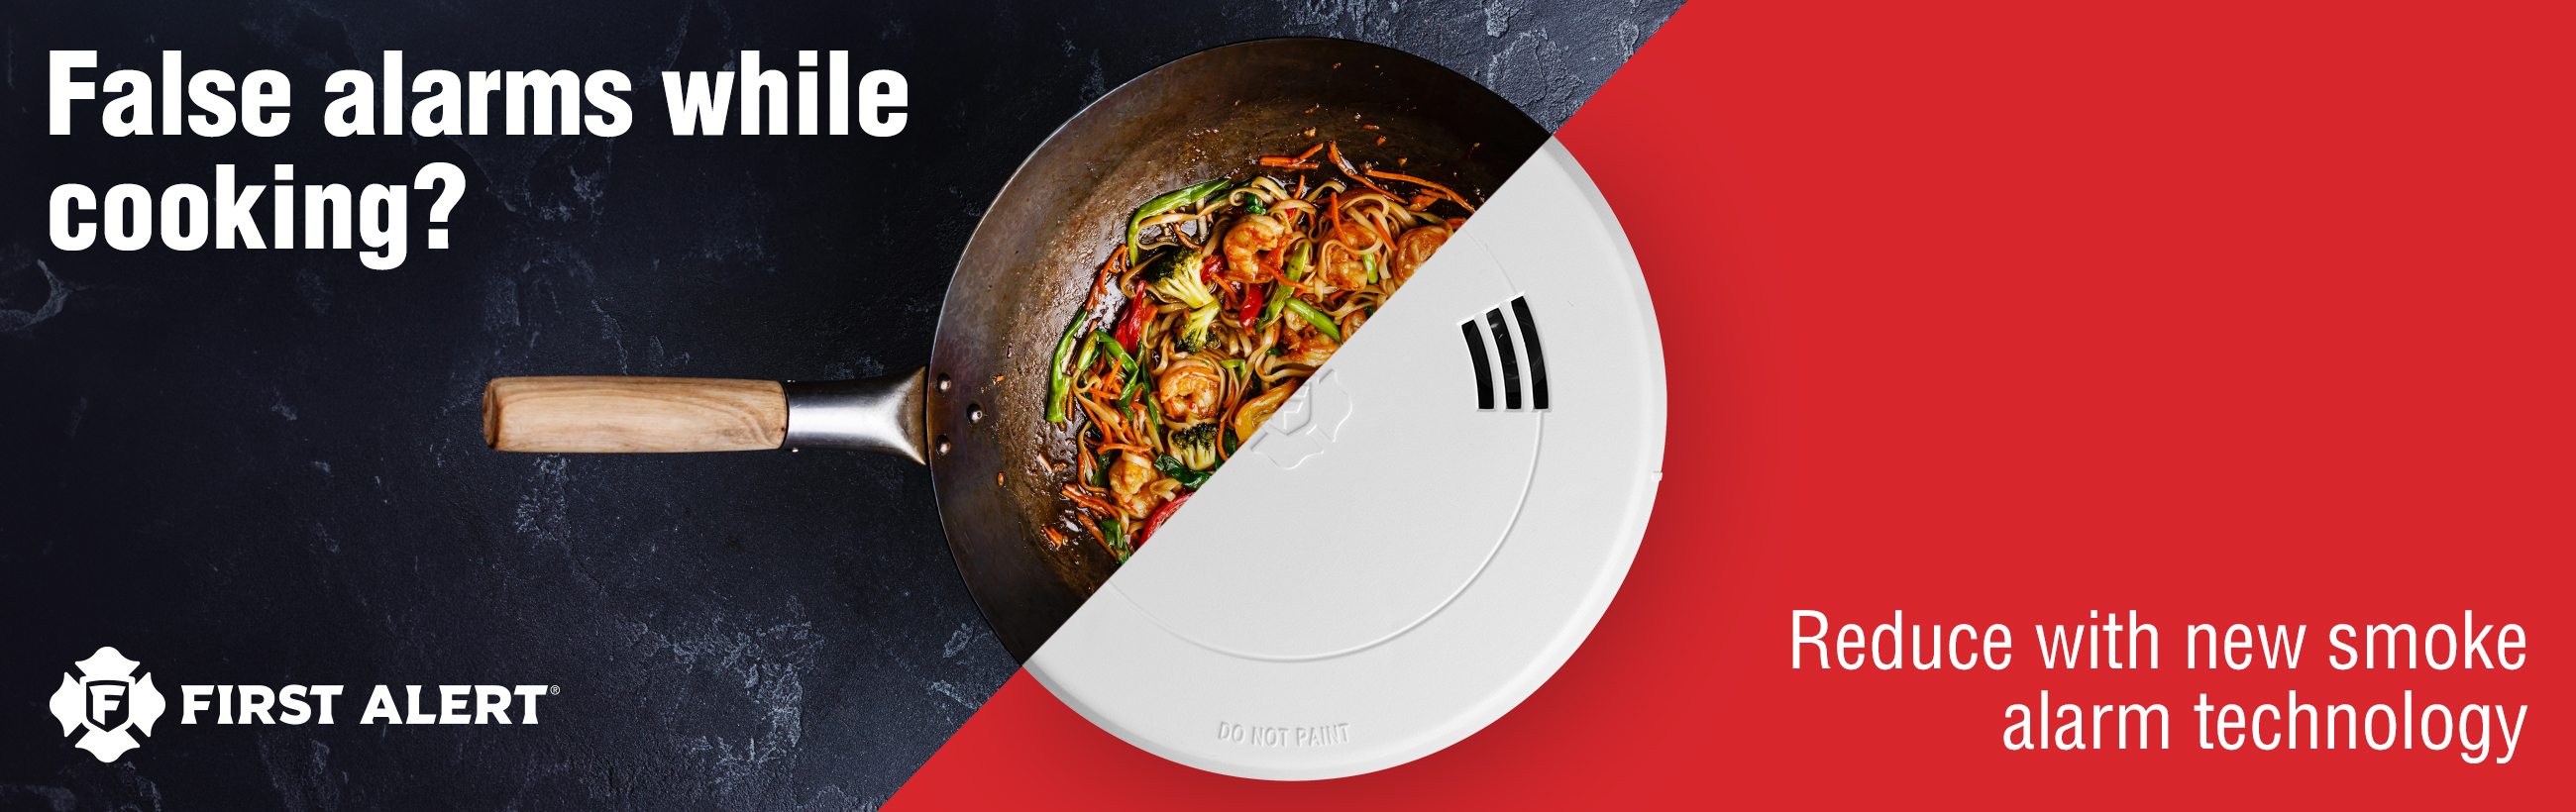 First Alert Precision Detection alarms provide early warning and help reduce nuisance alarms caused by cooking, smoke and steam.